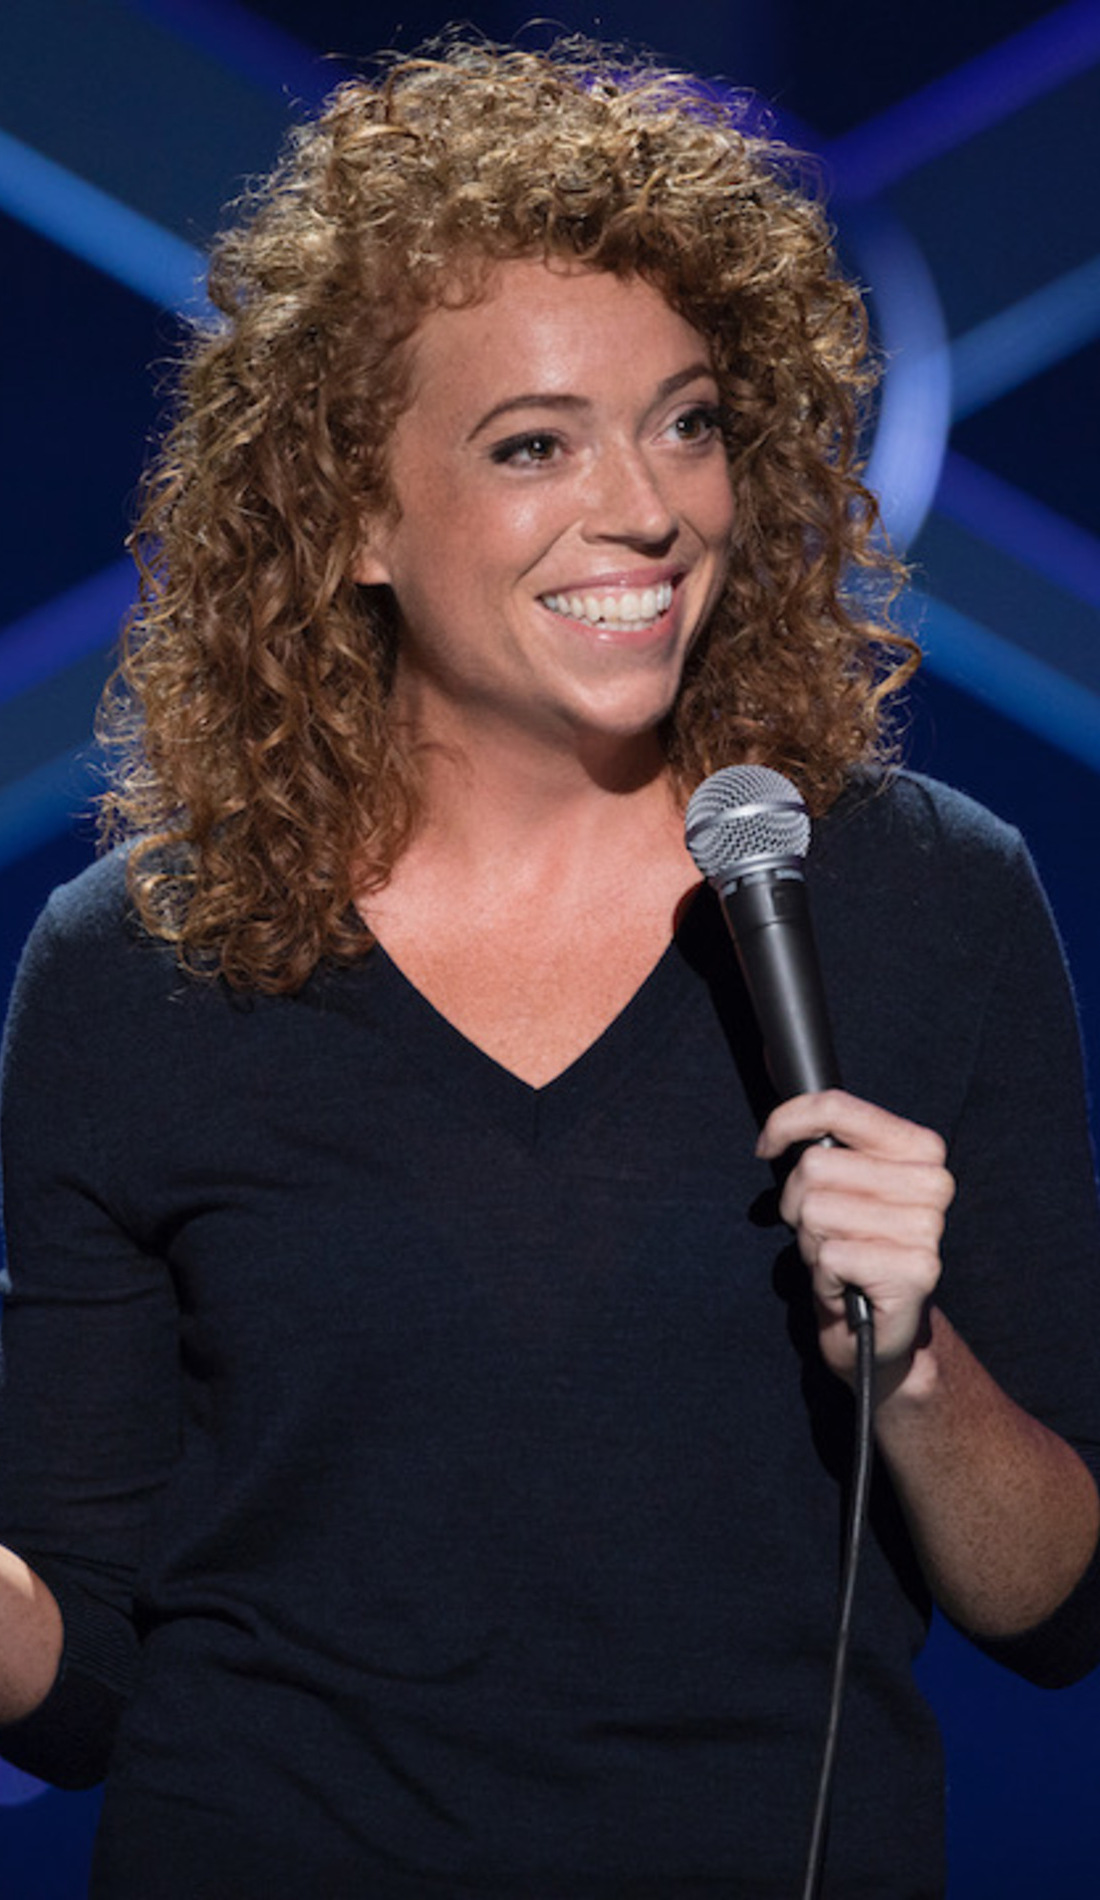 A Michelle Wolf live event